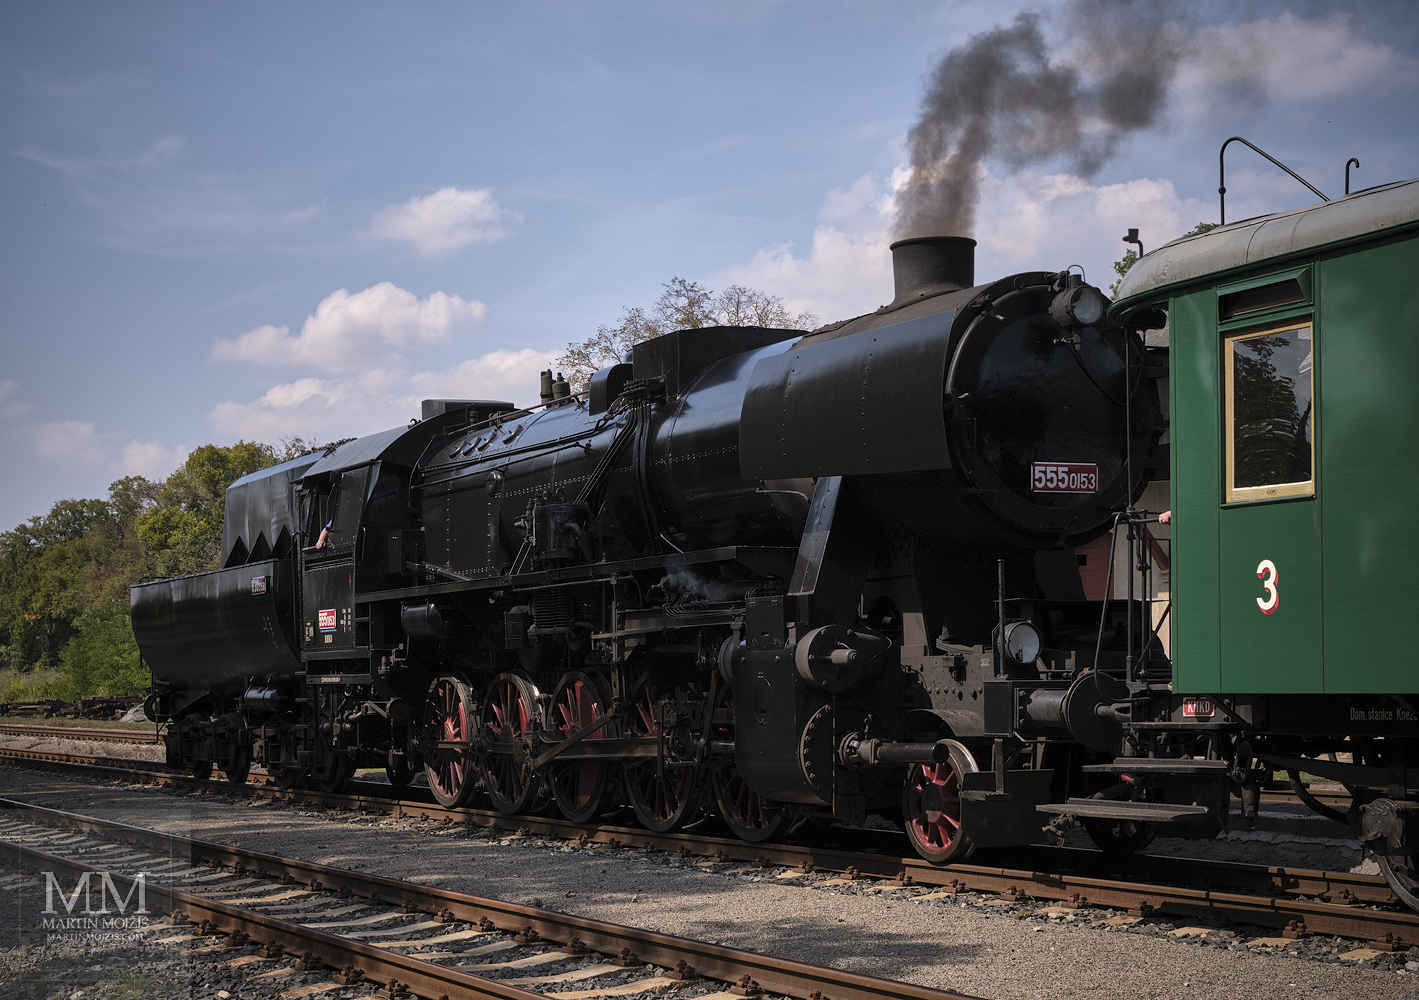 Fine Art  photograph of the steam locomotive in the railway station. Martin Mojzis.